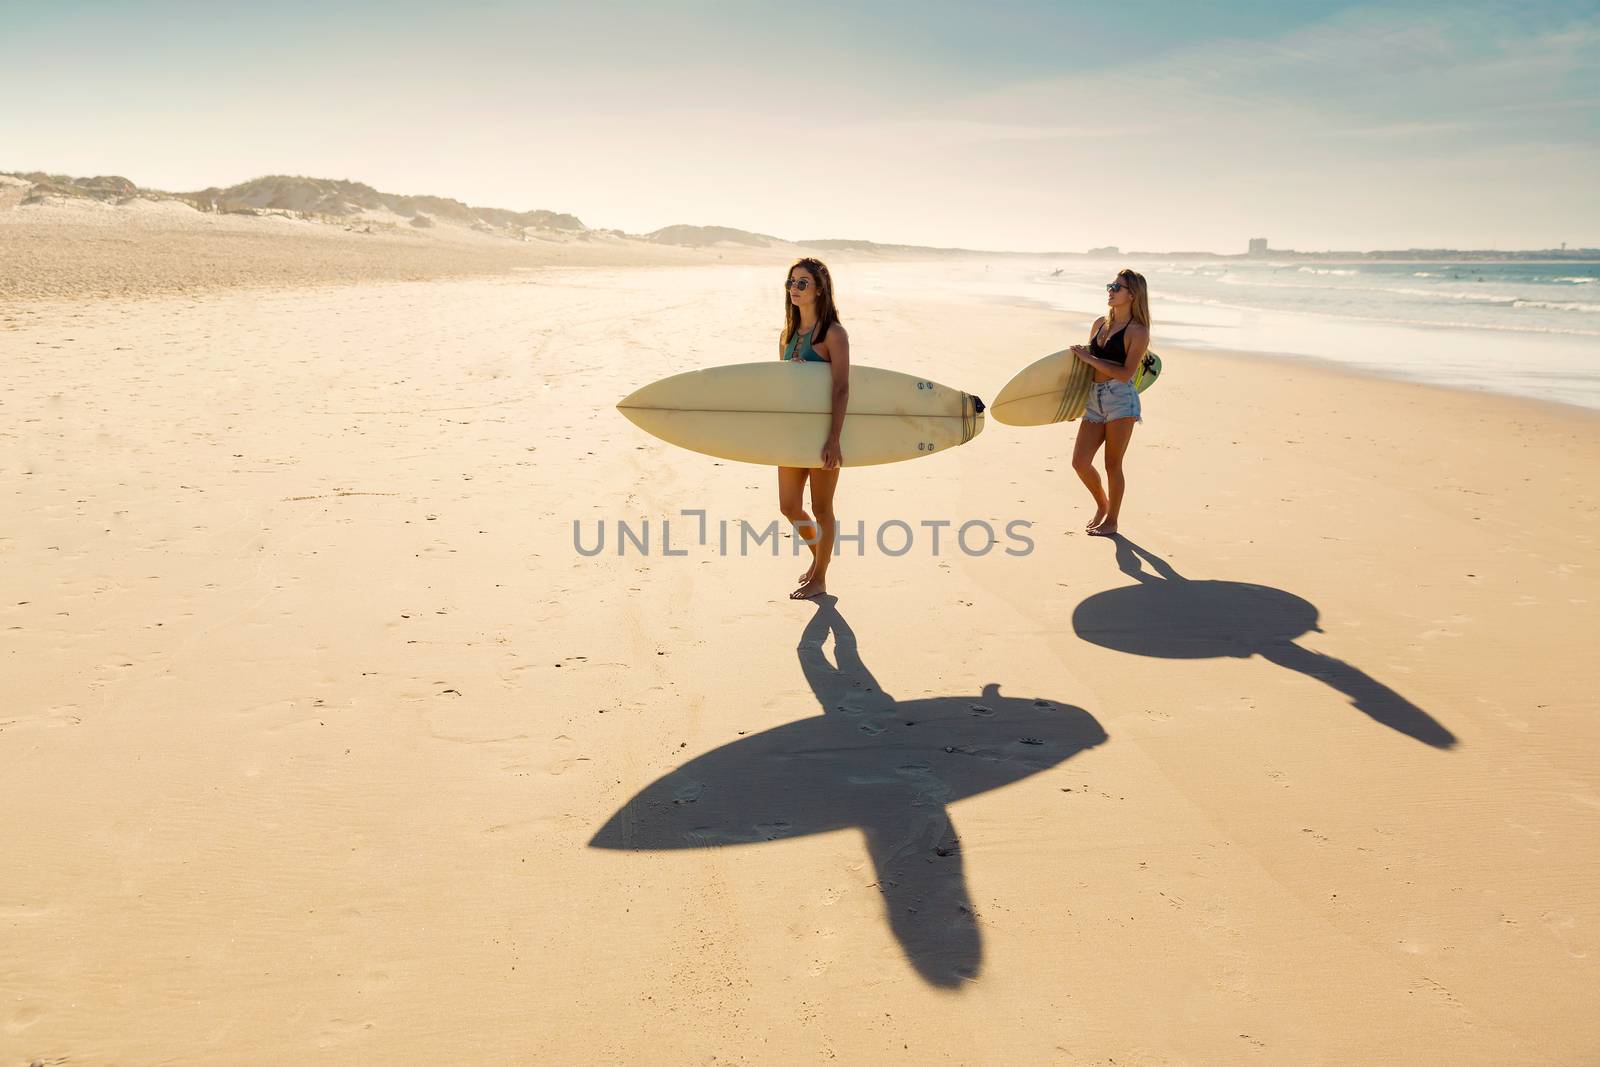 Two beautiful friends holding their surfboards and walking on the beach